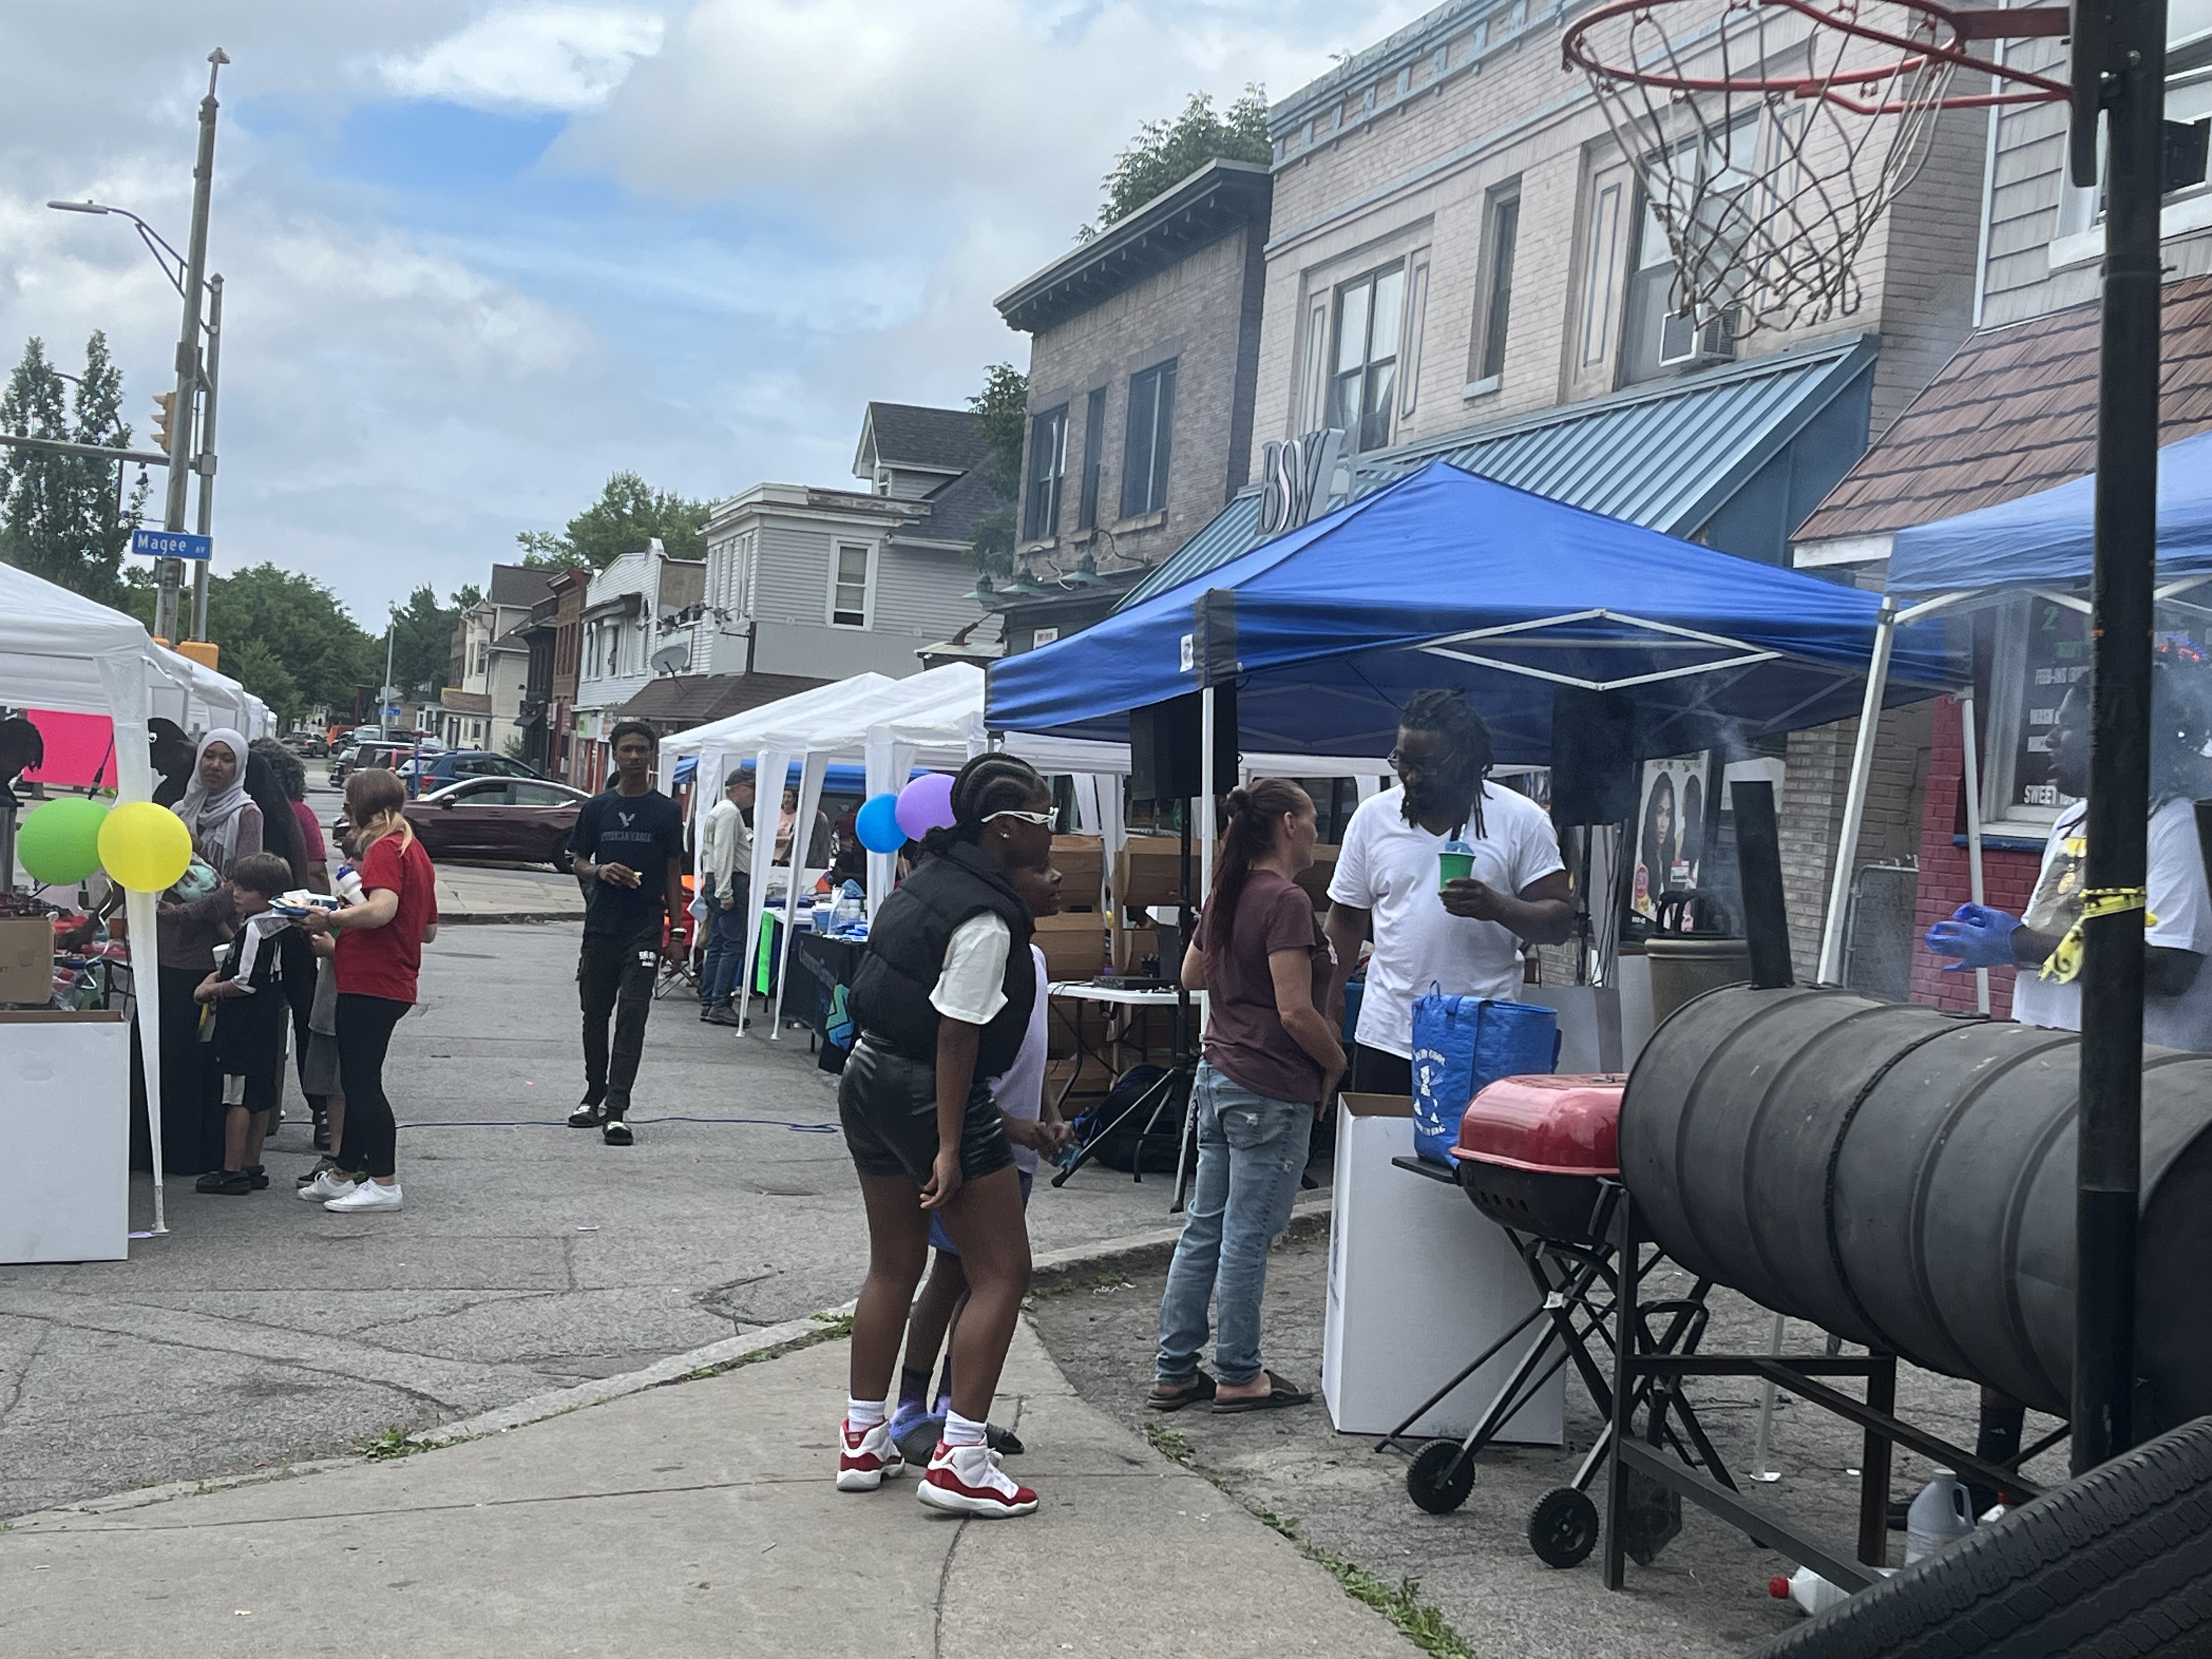 Juneteenth Freedom Resource Festival Tents, Grill, and People